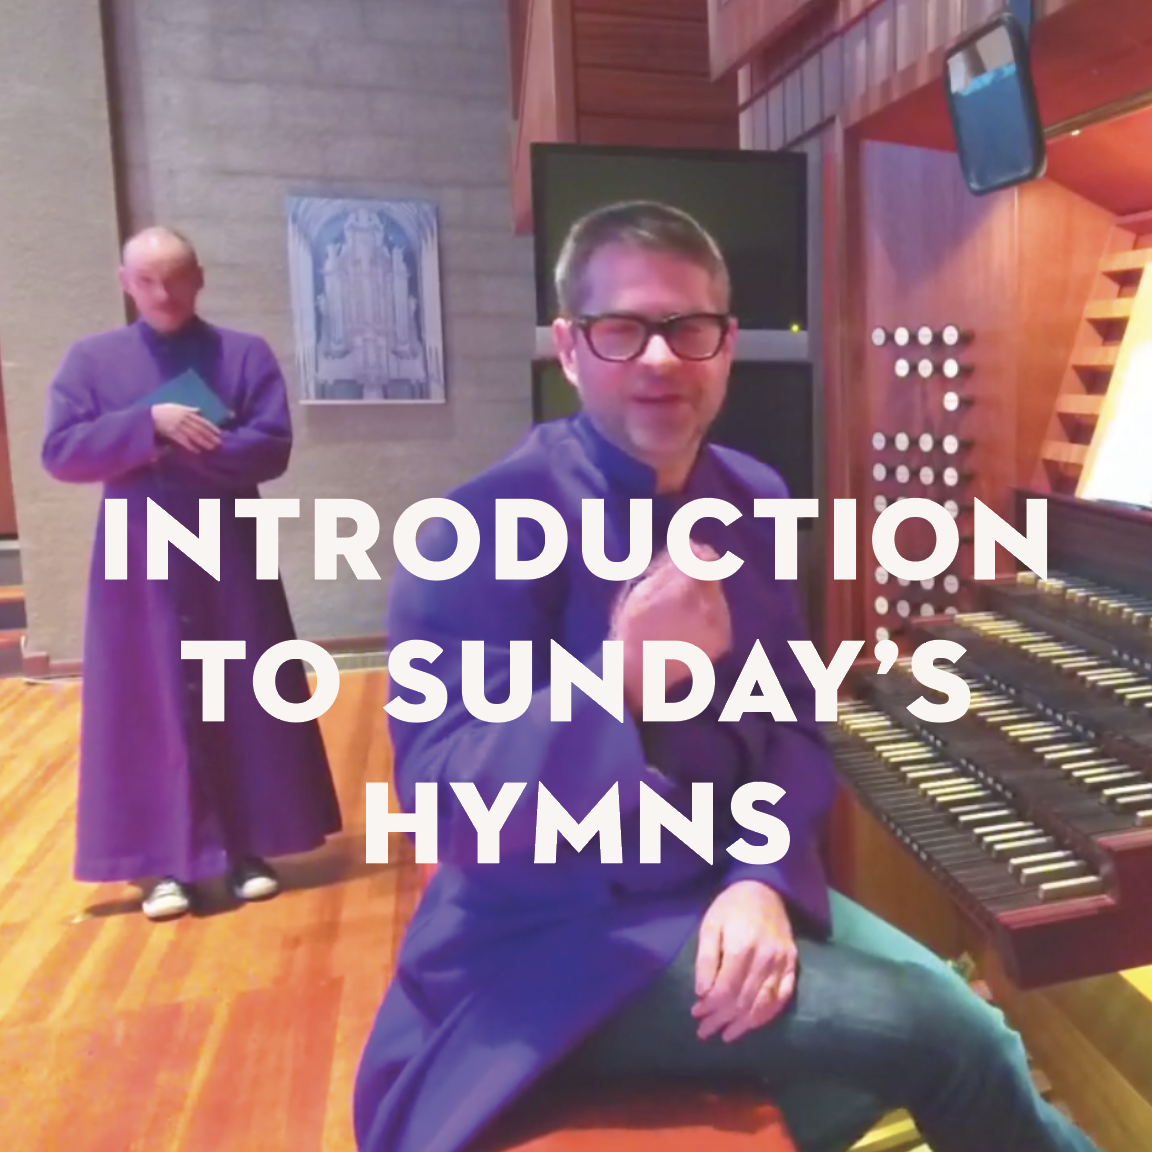 Introduction to Sunday’s Hymns: January 31, 2021